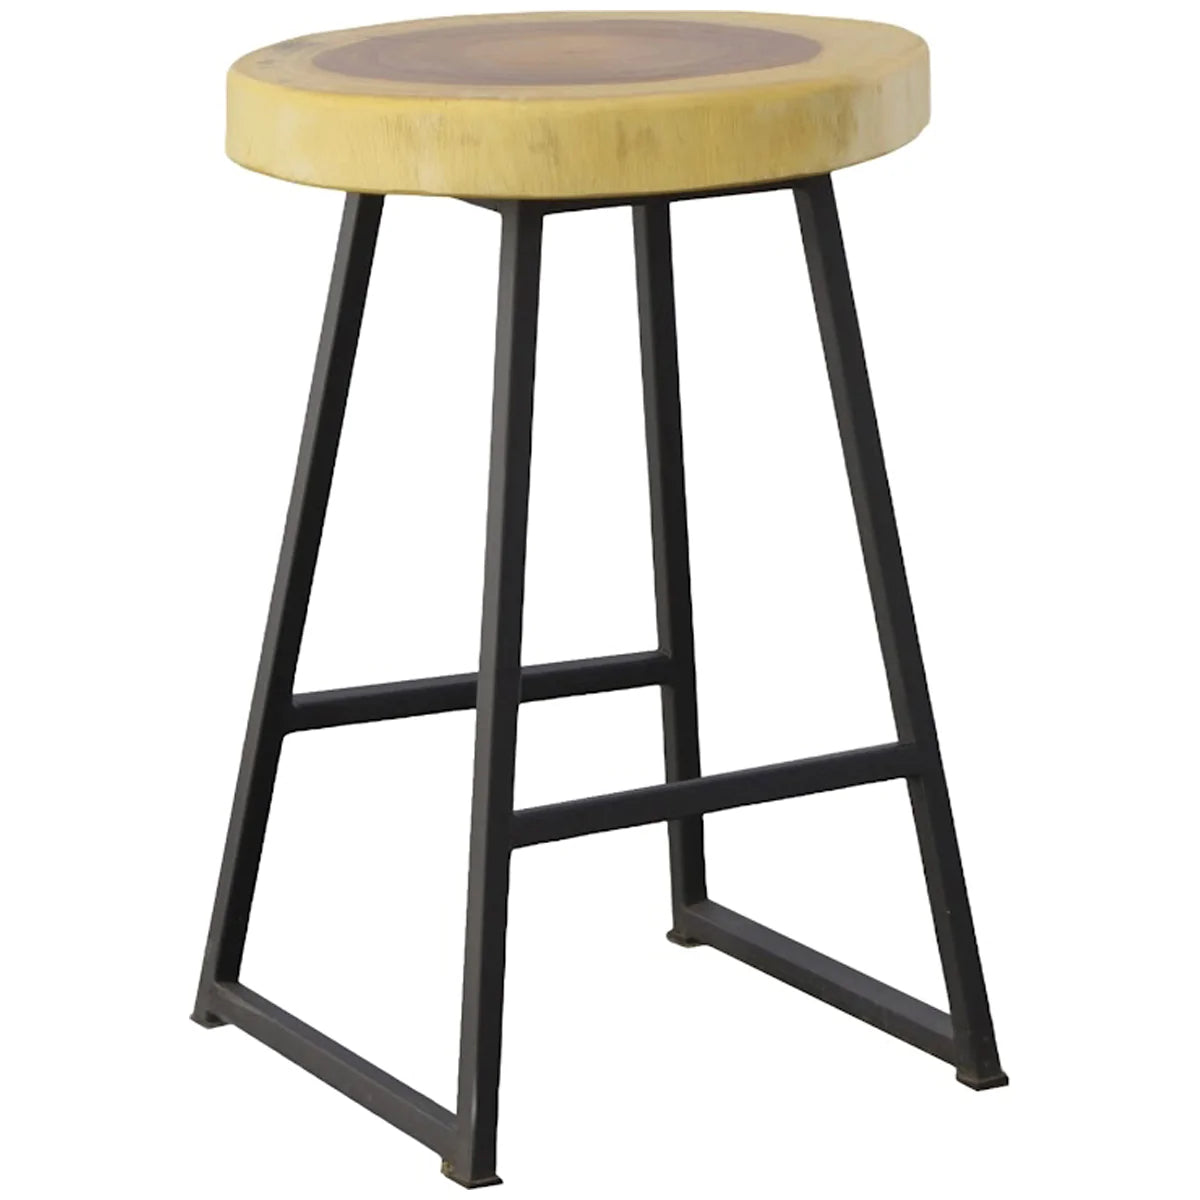 Phillips Collection Chuleta Natural Round Bar Stool